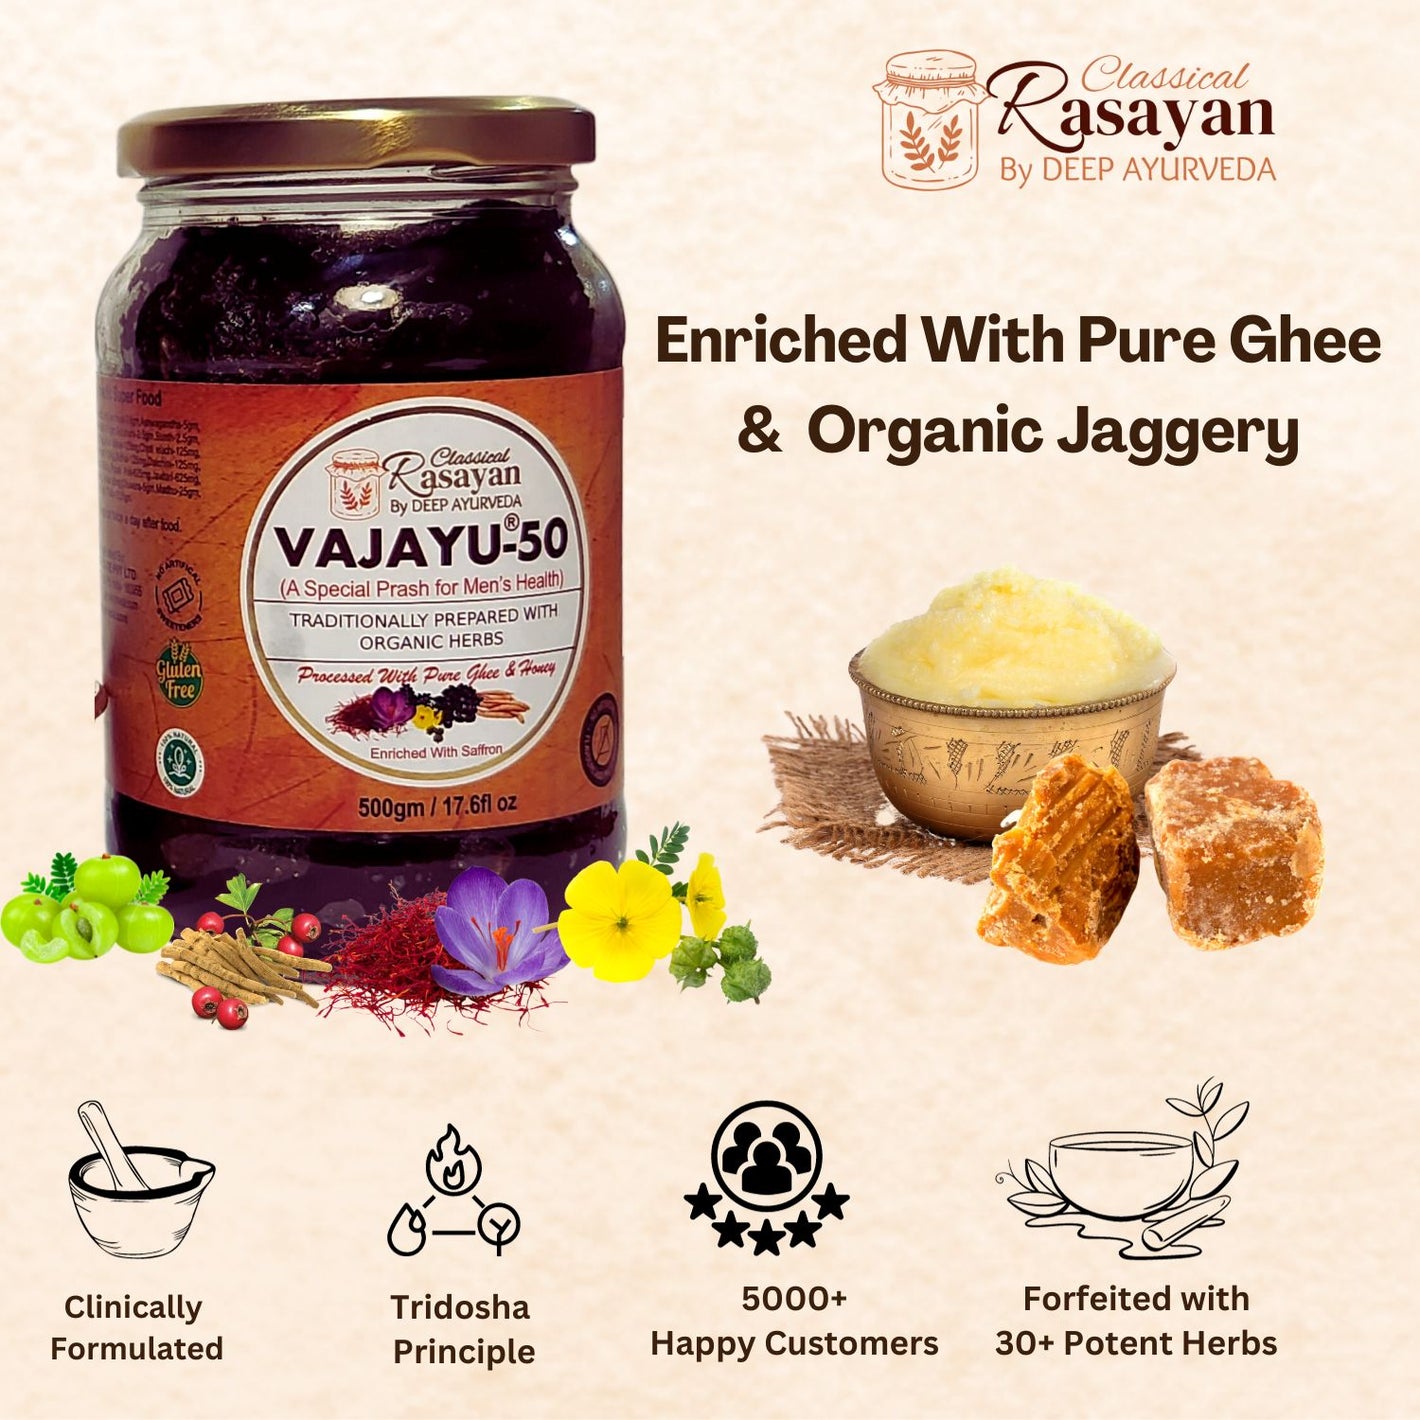 Vajayu enriched with Organic Jaggery